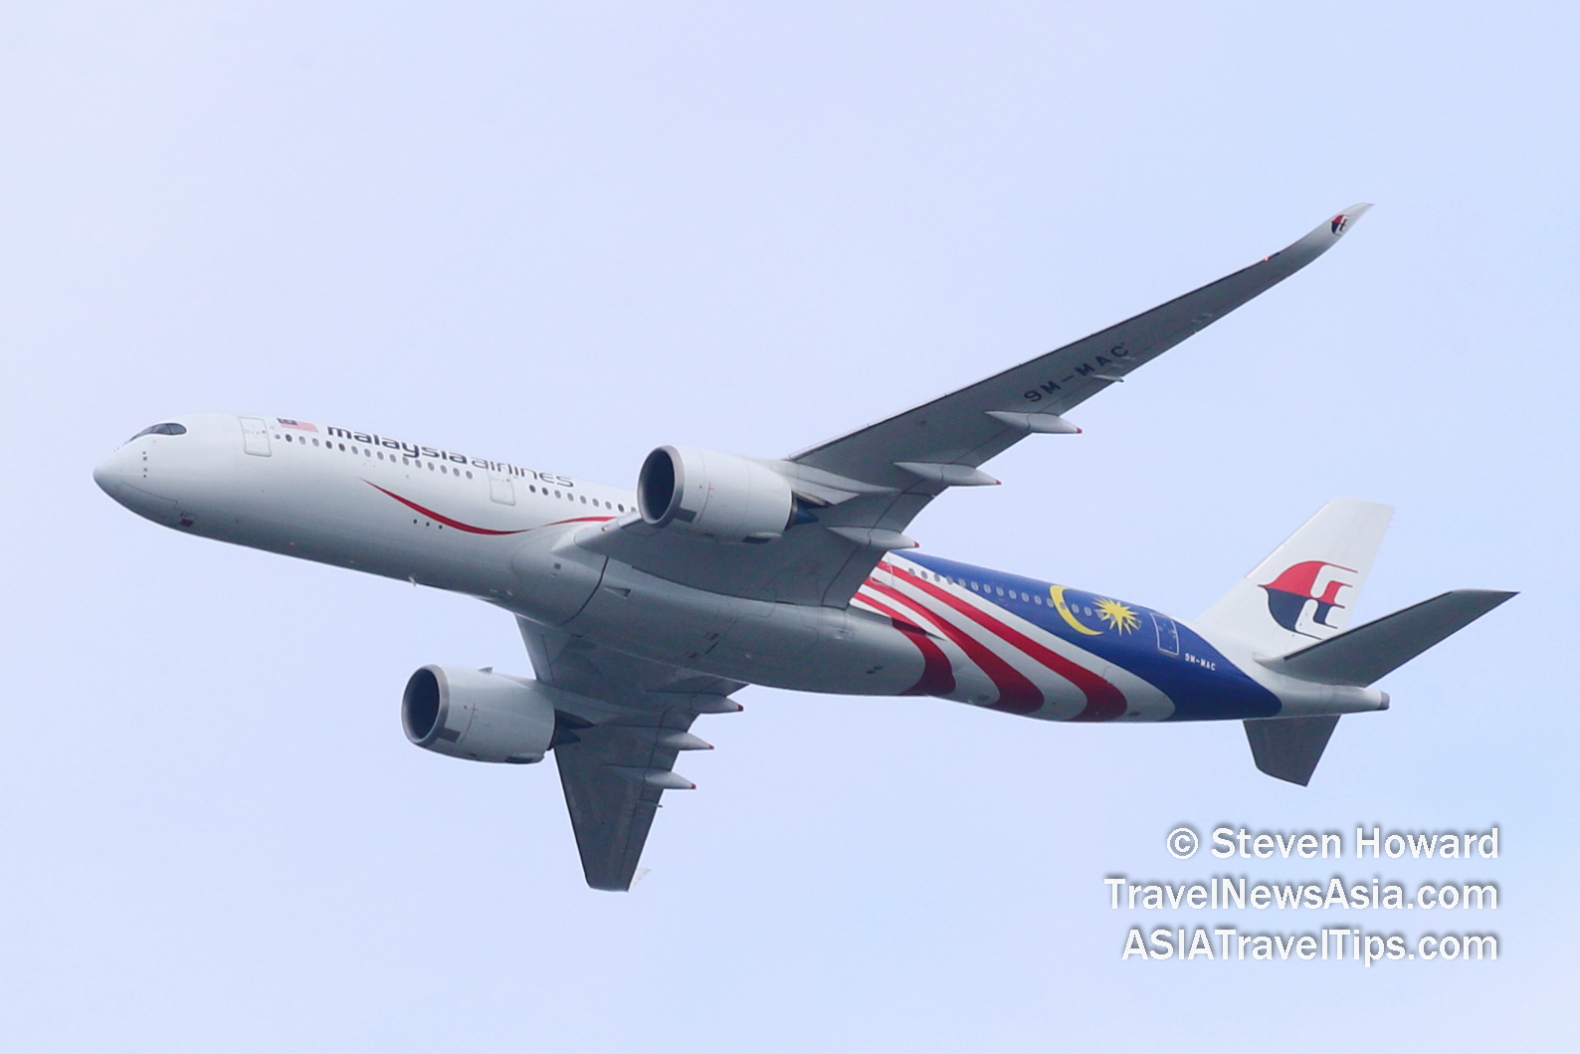 Malaysia Airlines A350-900 reg: 9M-MAC. Picture by Steven Howard of TravelNewsAsia.com Click to enlarge.